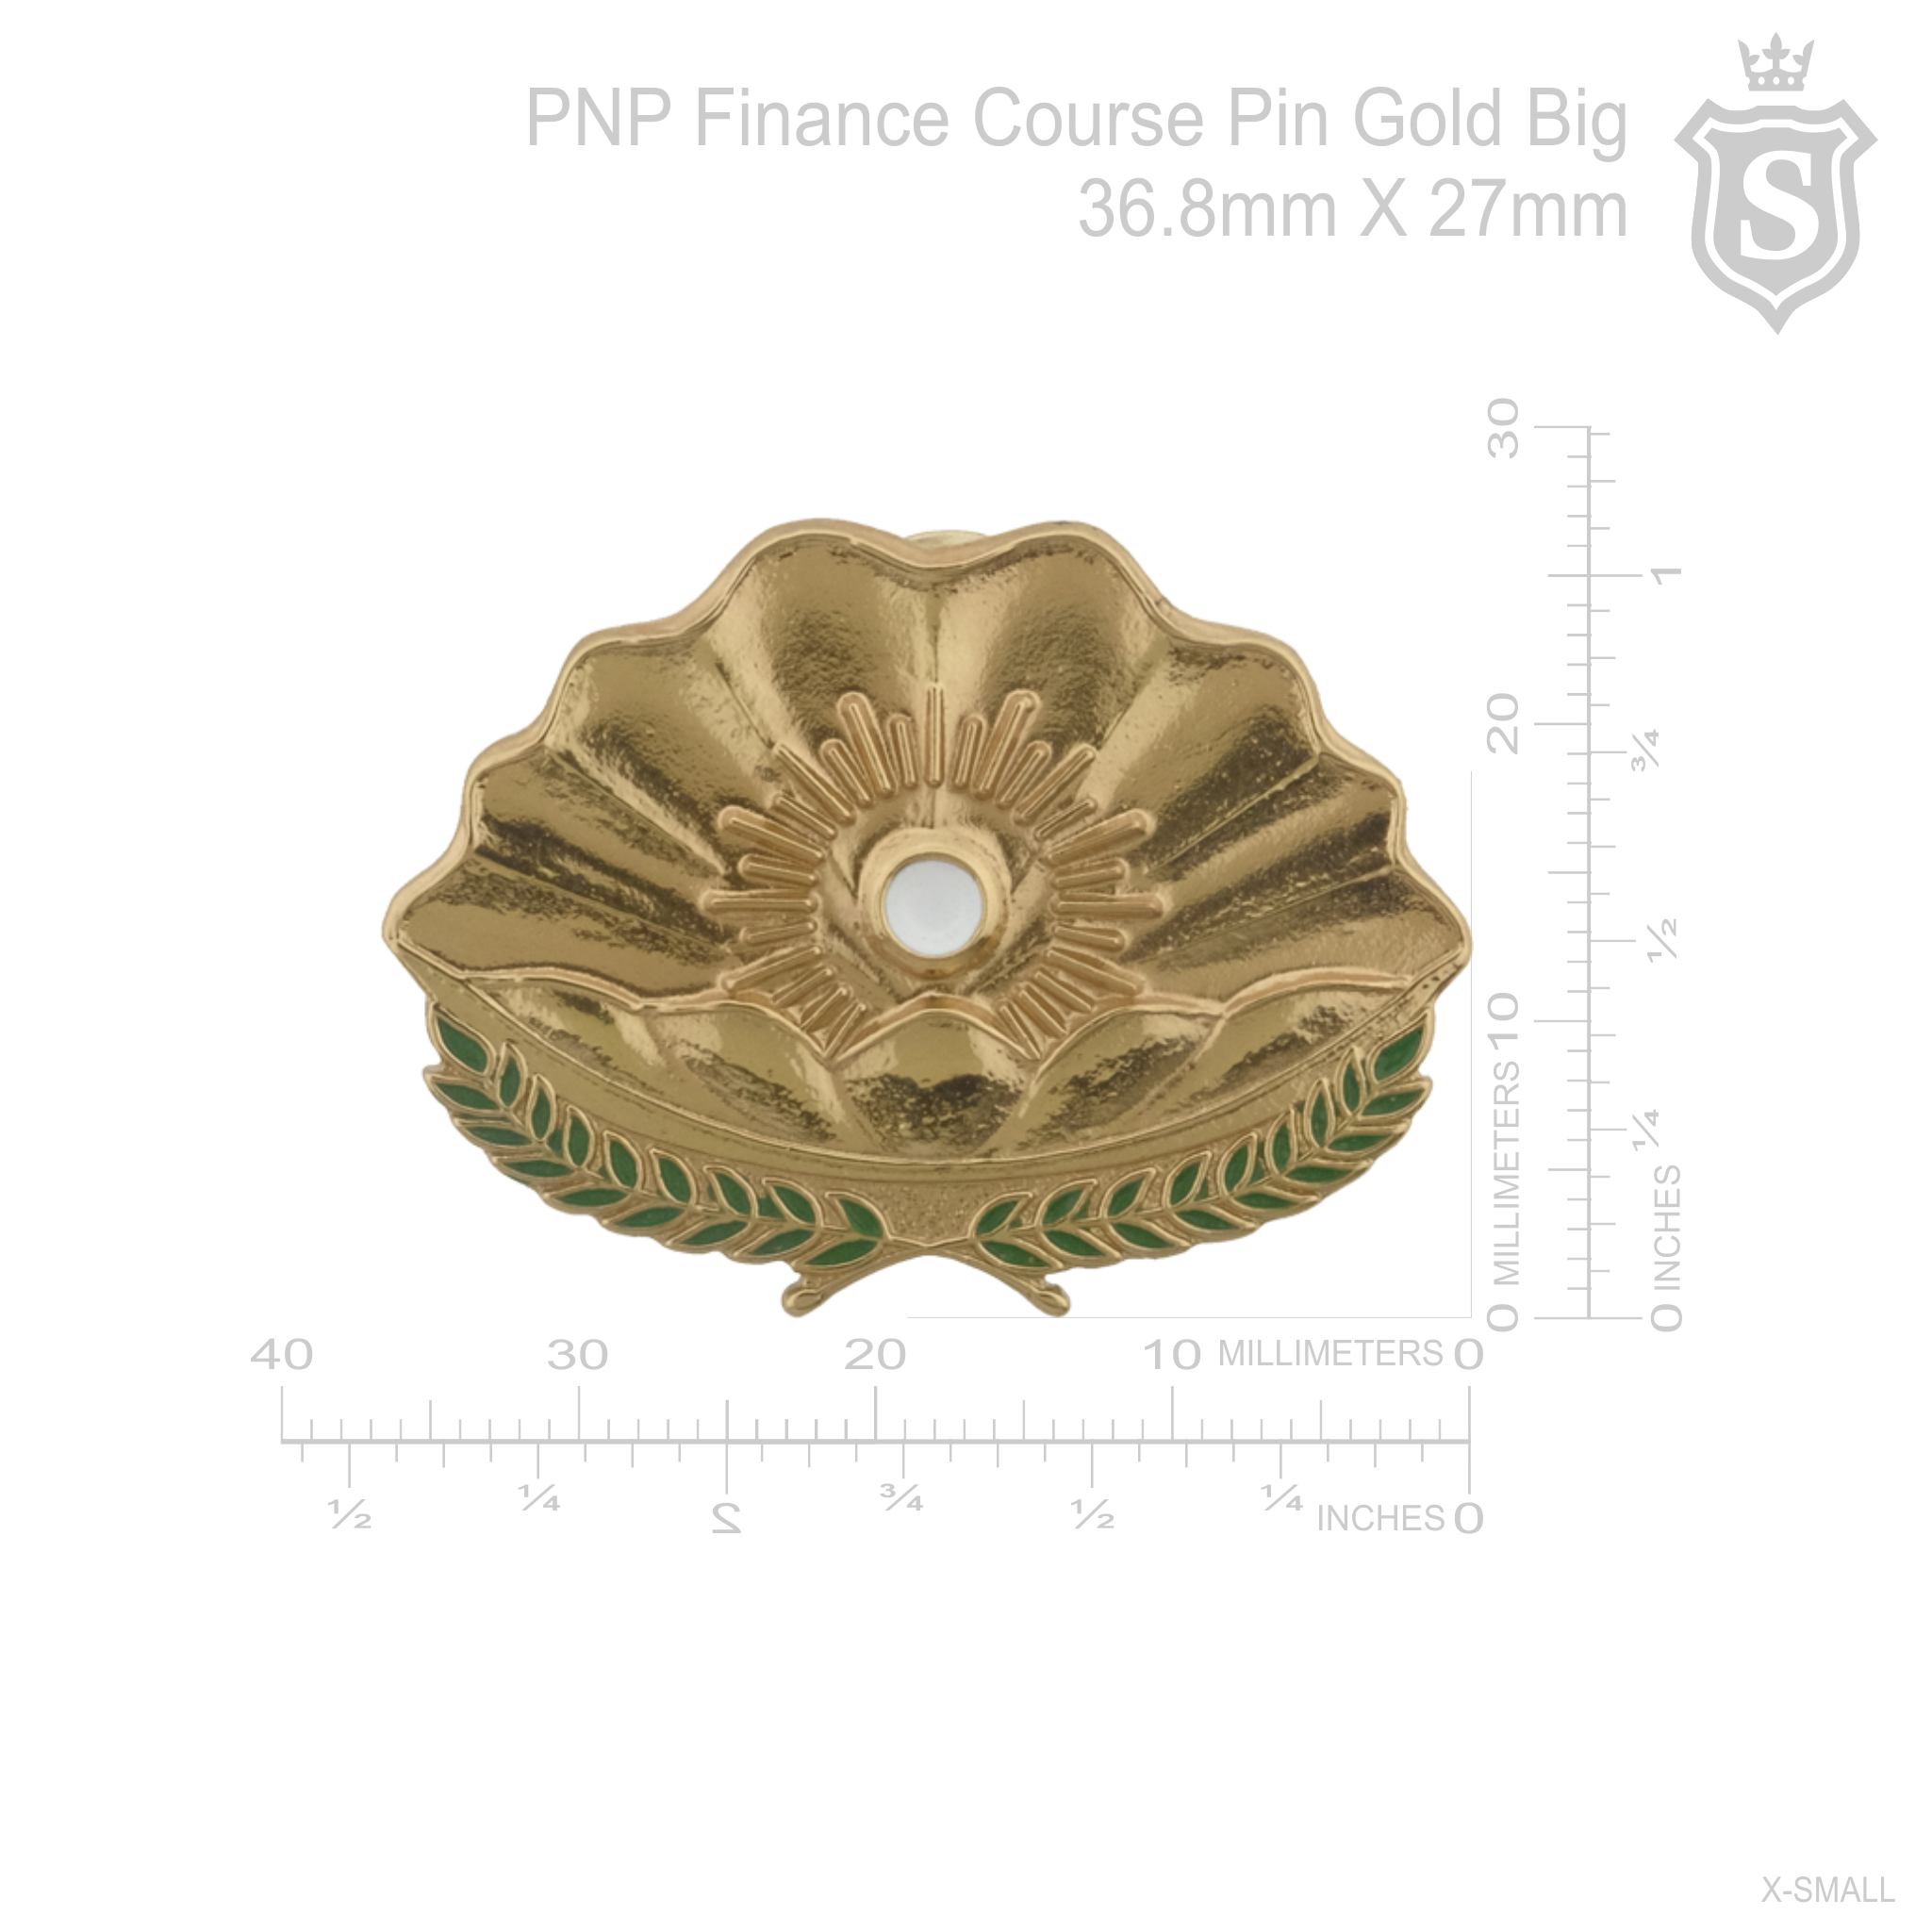 Finance Course Pin - PNP